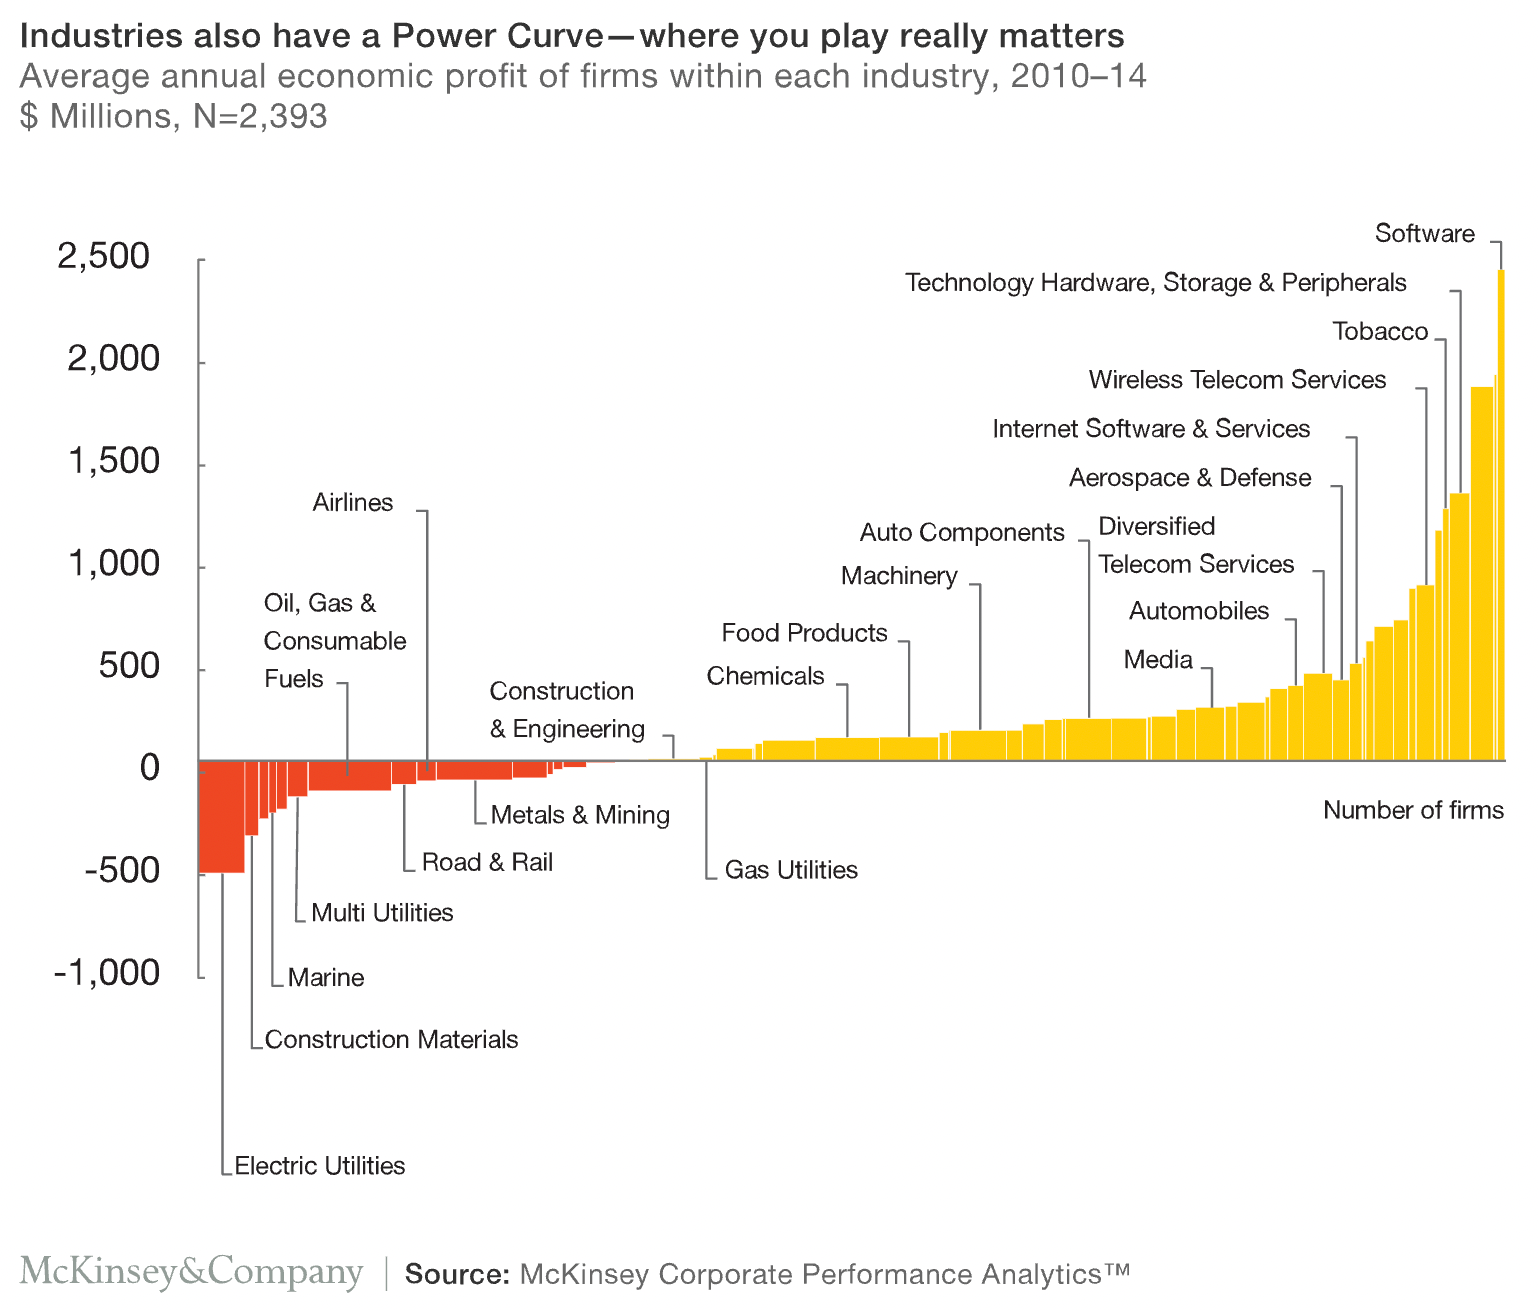 The Industry Power Curve